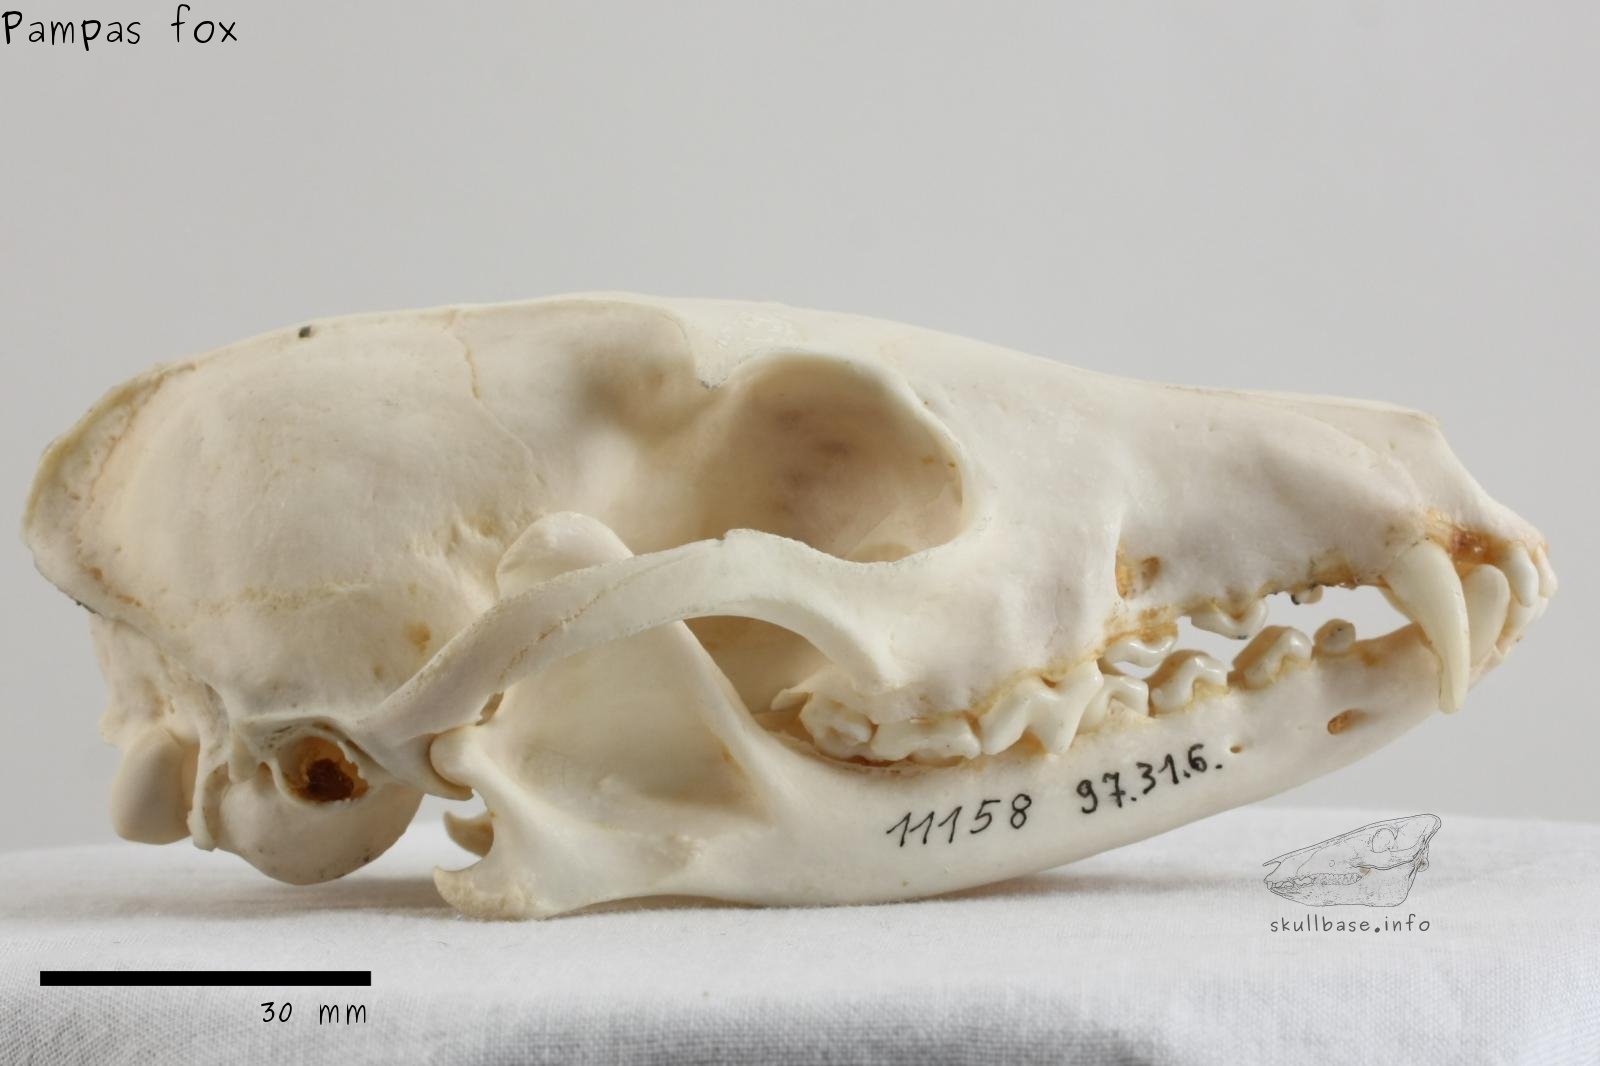 Pampas fox (Lycalopex gymnocercus) skull lateral view